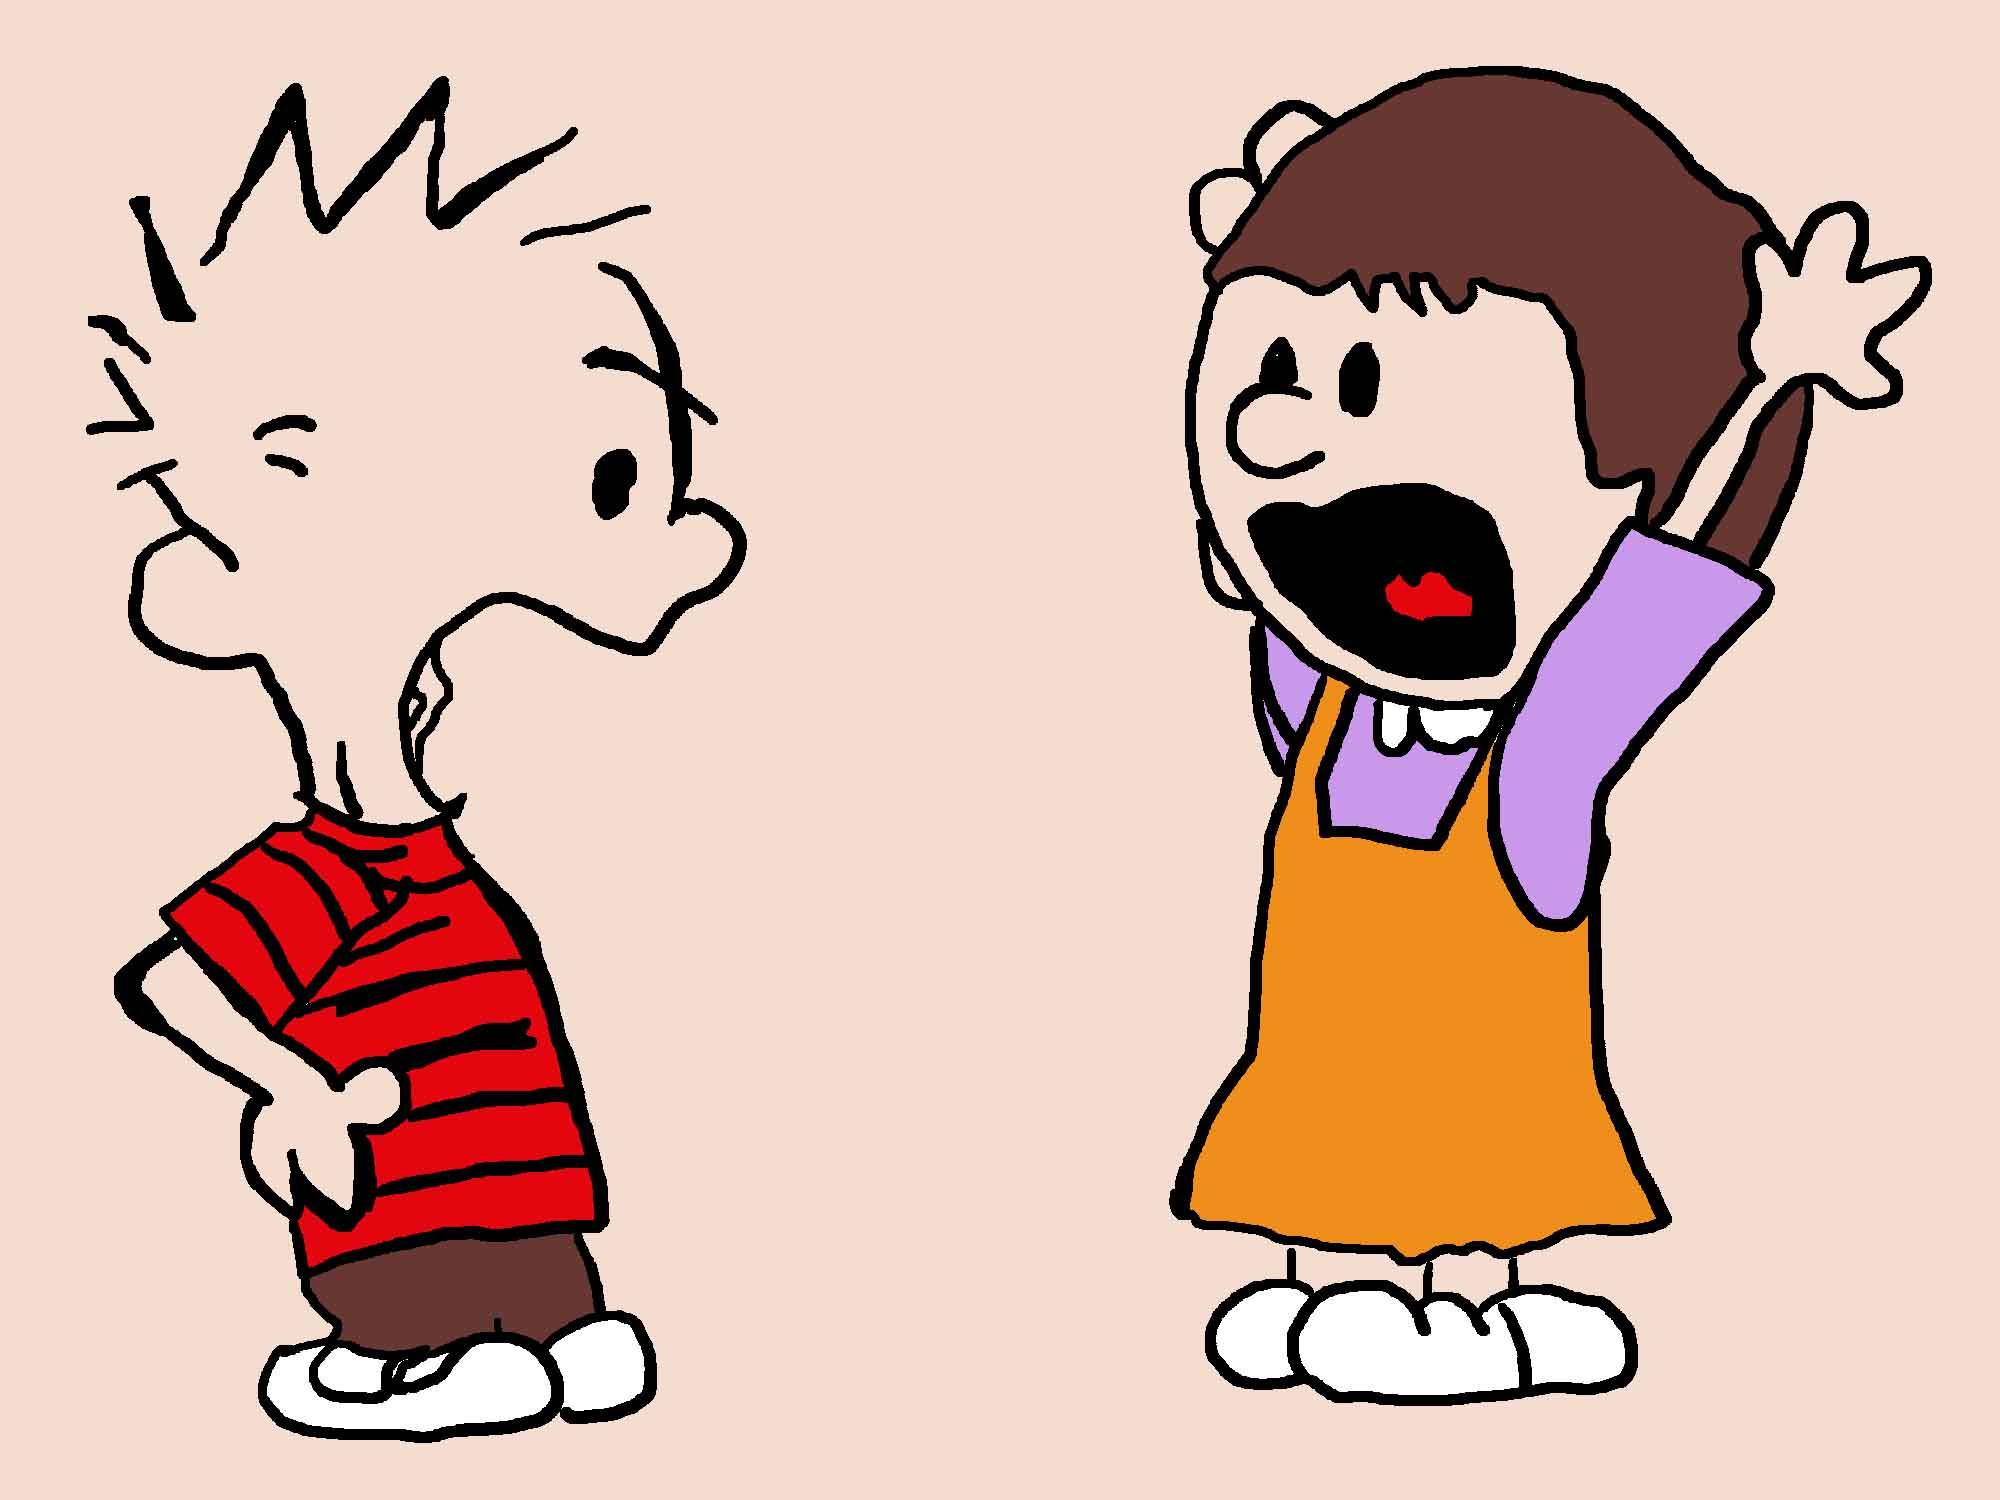 Free Conflict Cliparts Calvin, Download Free Conflict Cliparts Calvin ...
 Kids Argue Clipart